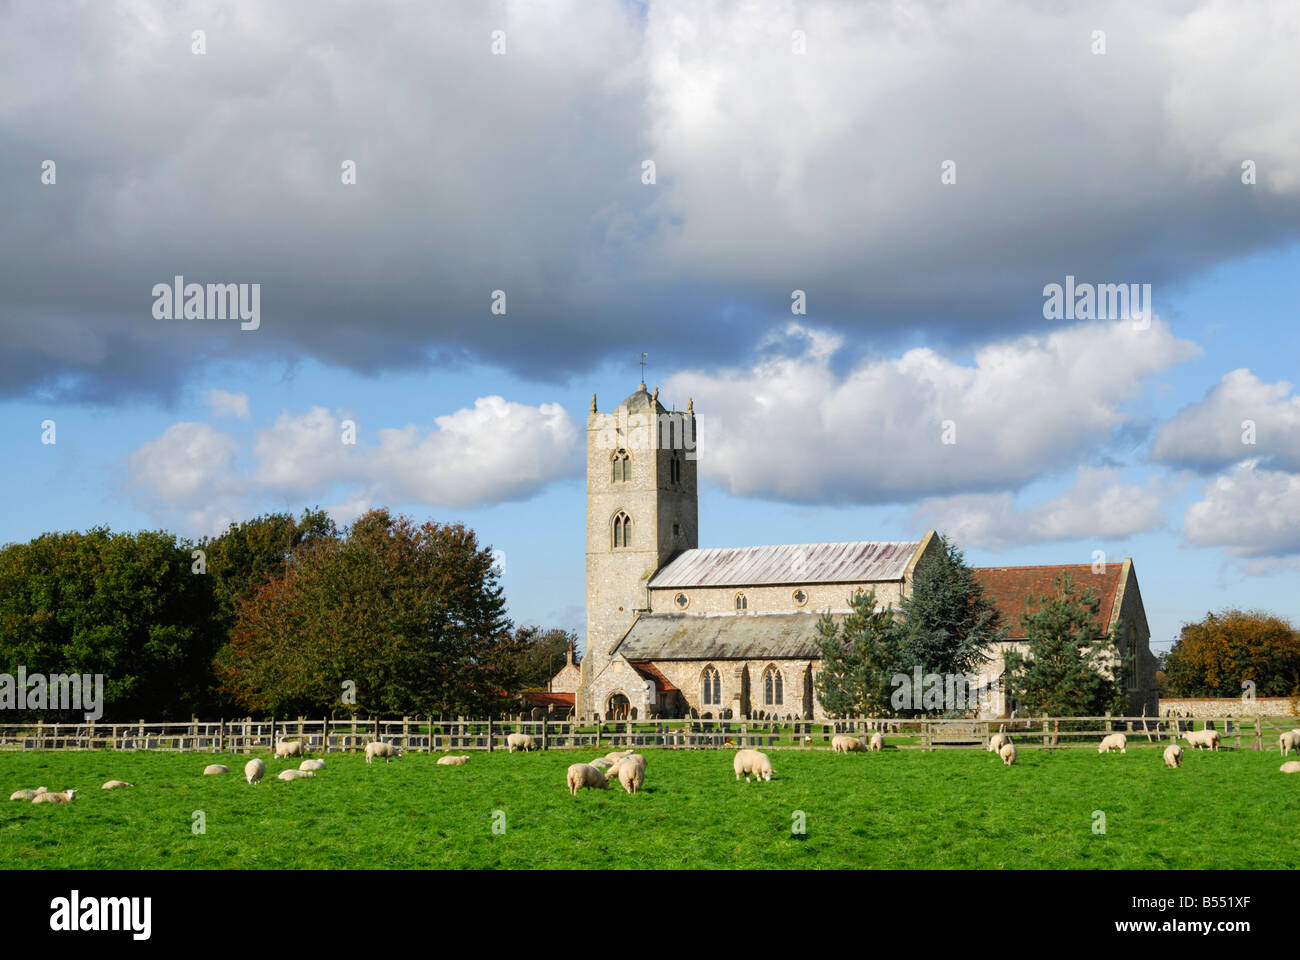 Gayton, Norfolk, UK. St Nicholas' Church with sheep in the foreground Stock Photo